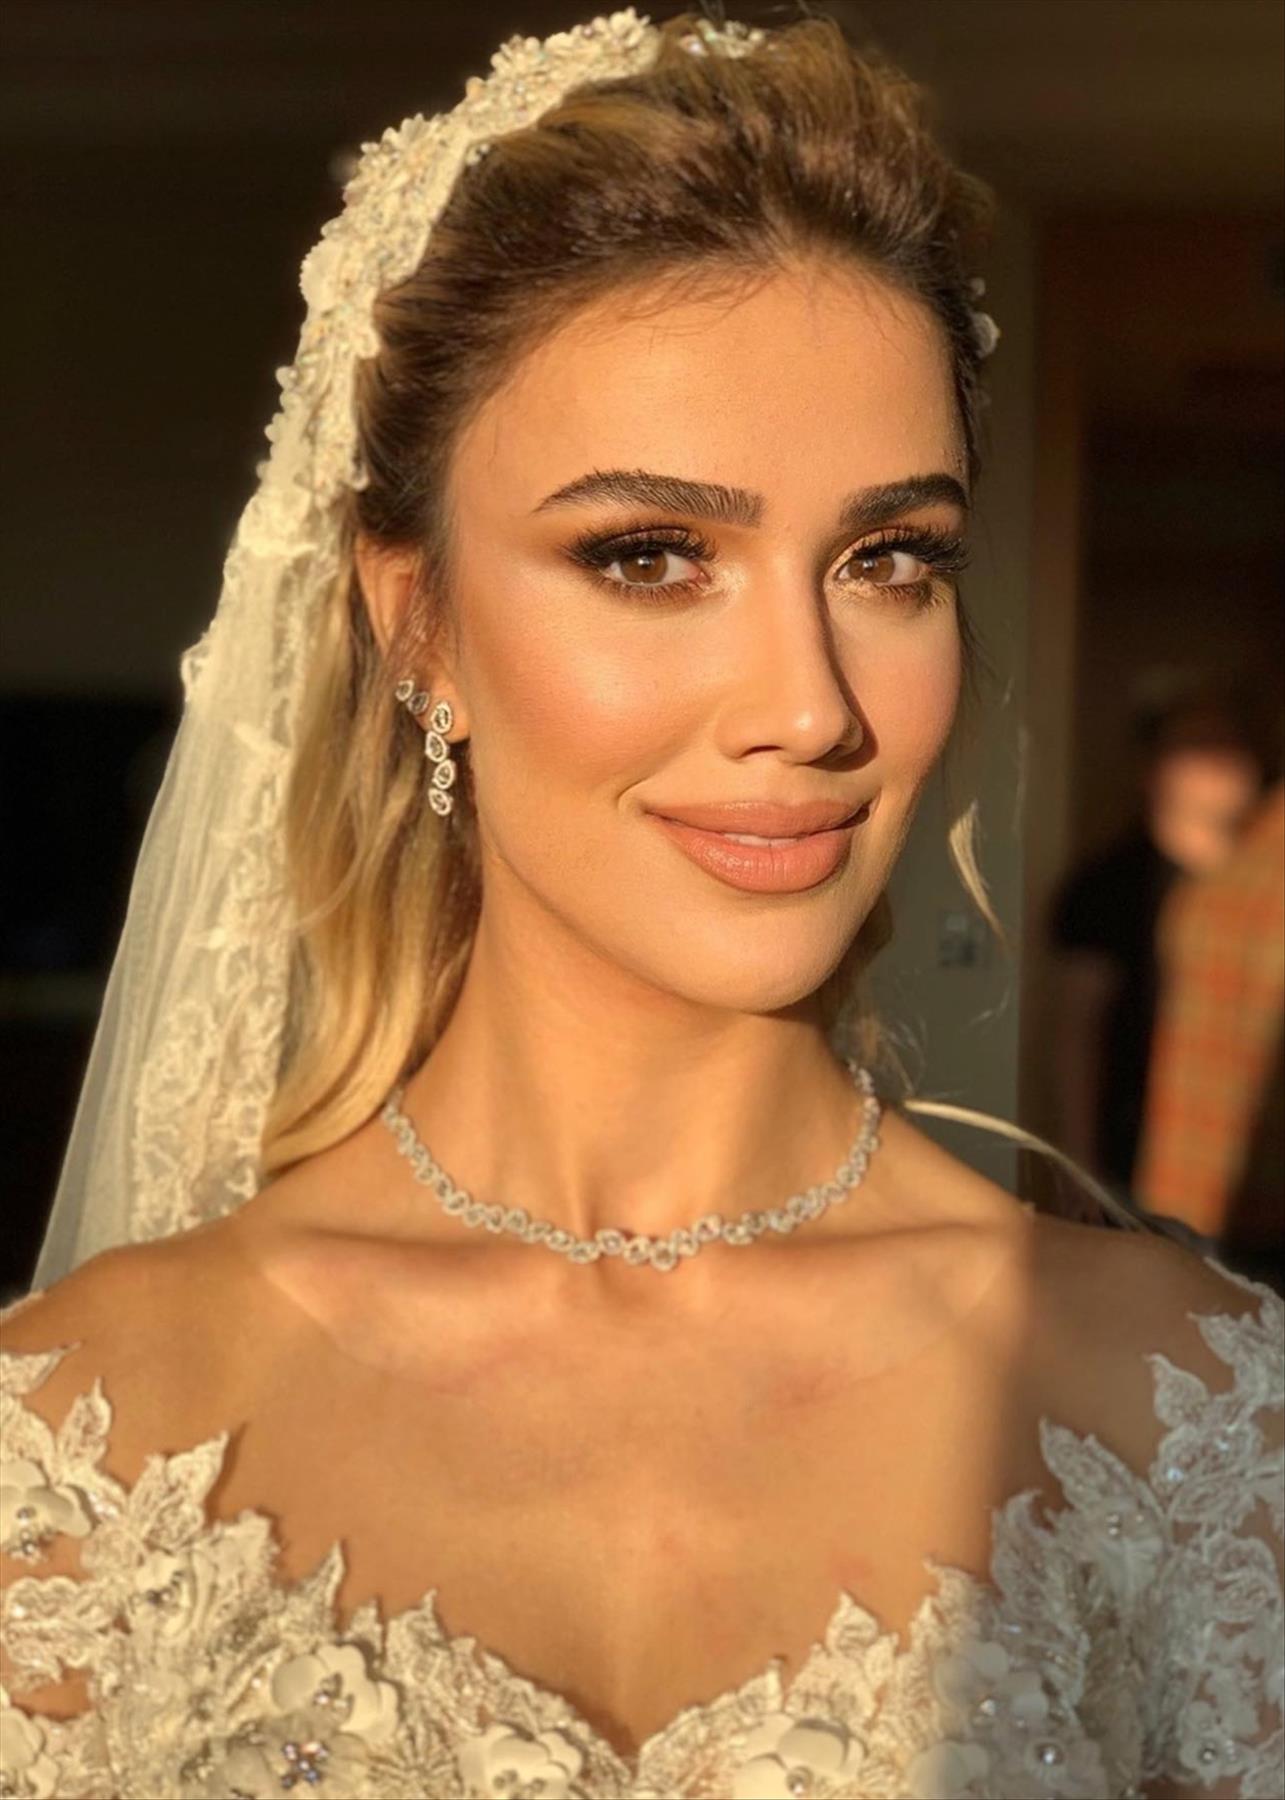 Stunning bridal makeup looks to brighten your Big Day